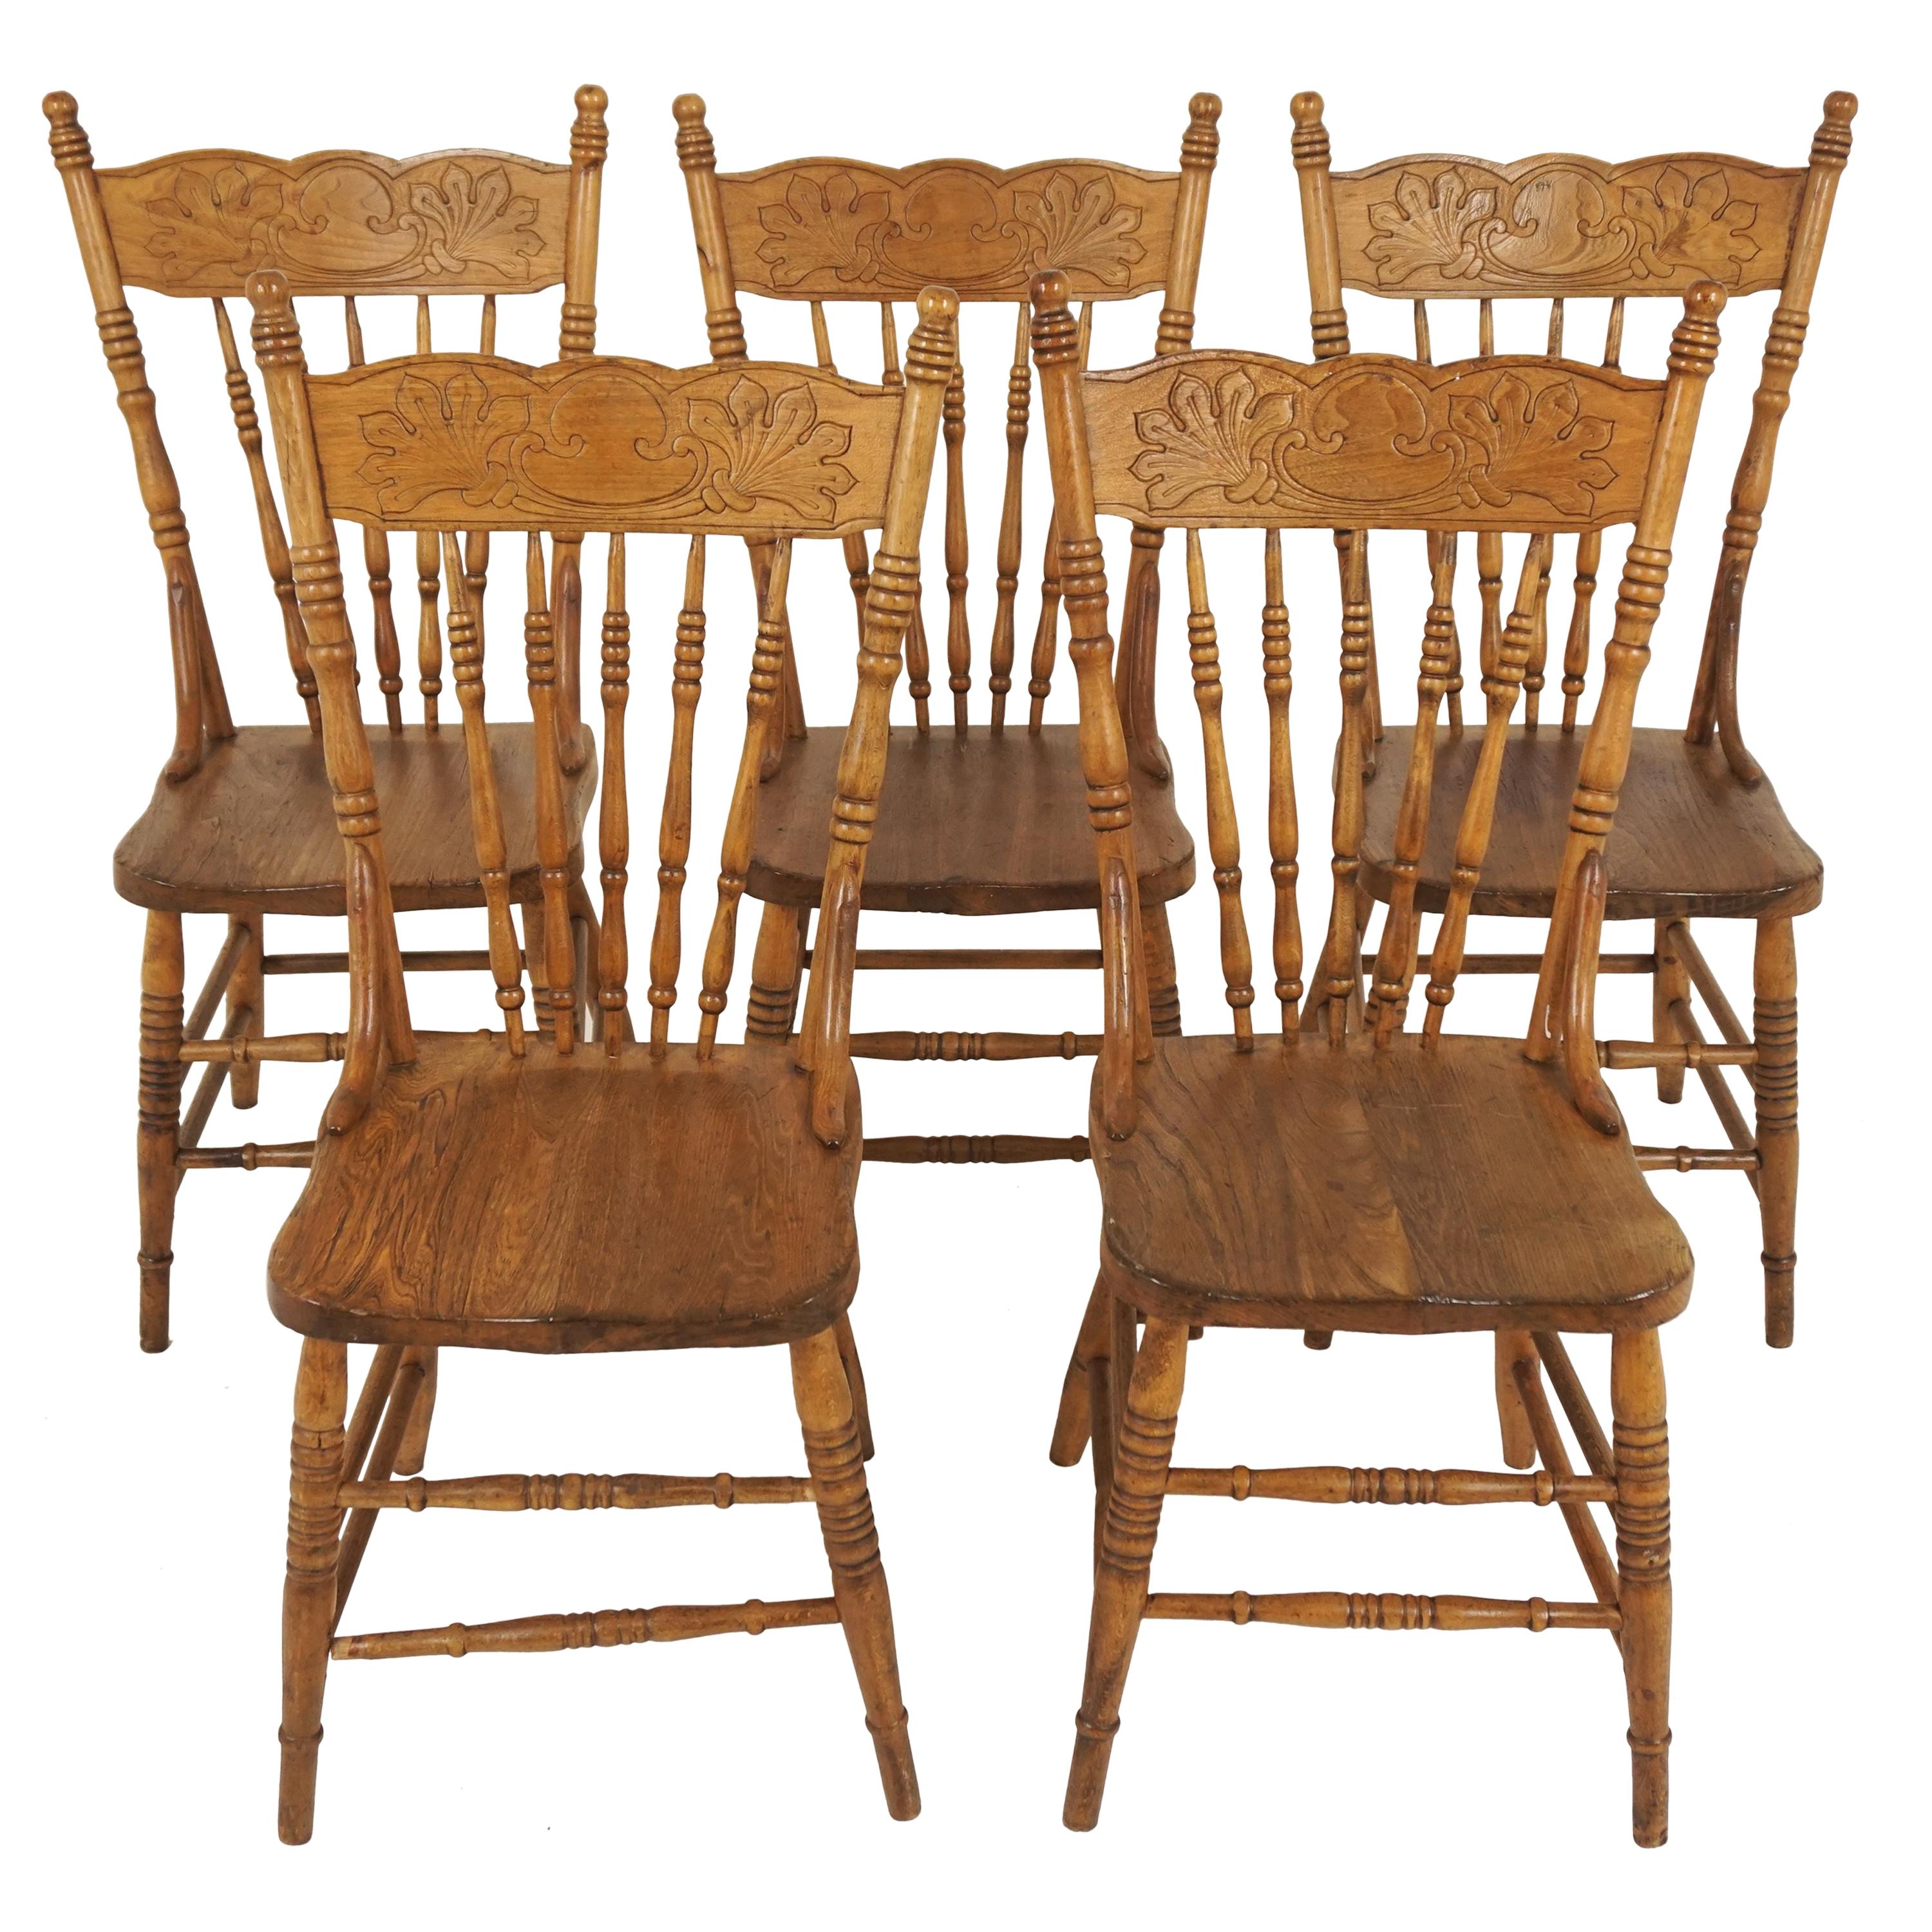 Antique Chairs, Set of 5, Ash Presstack Chairs, Solid Seats, American 1900 B2066